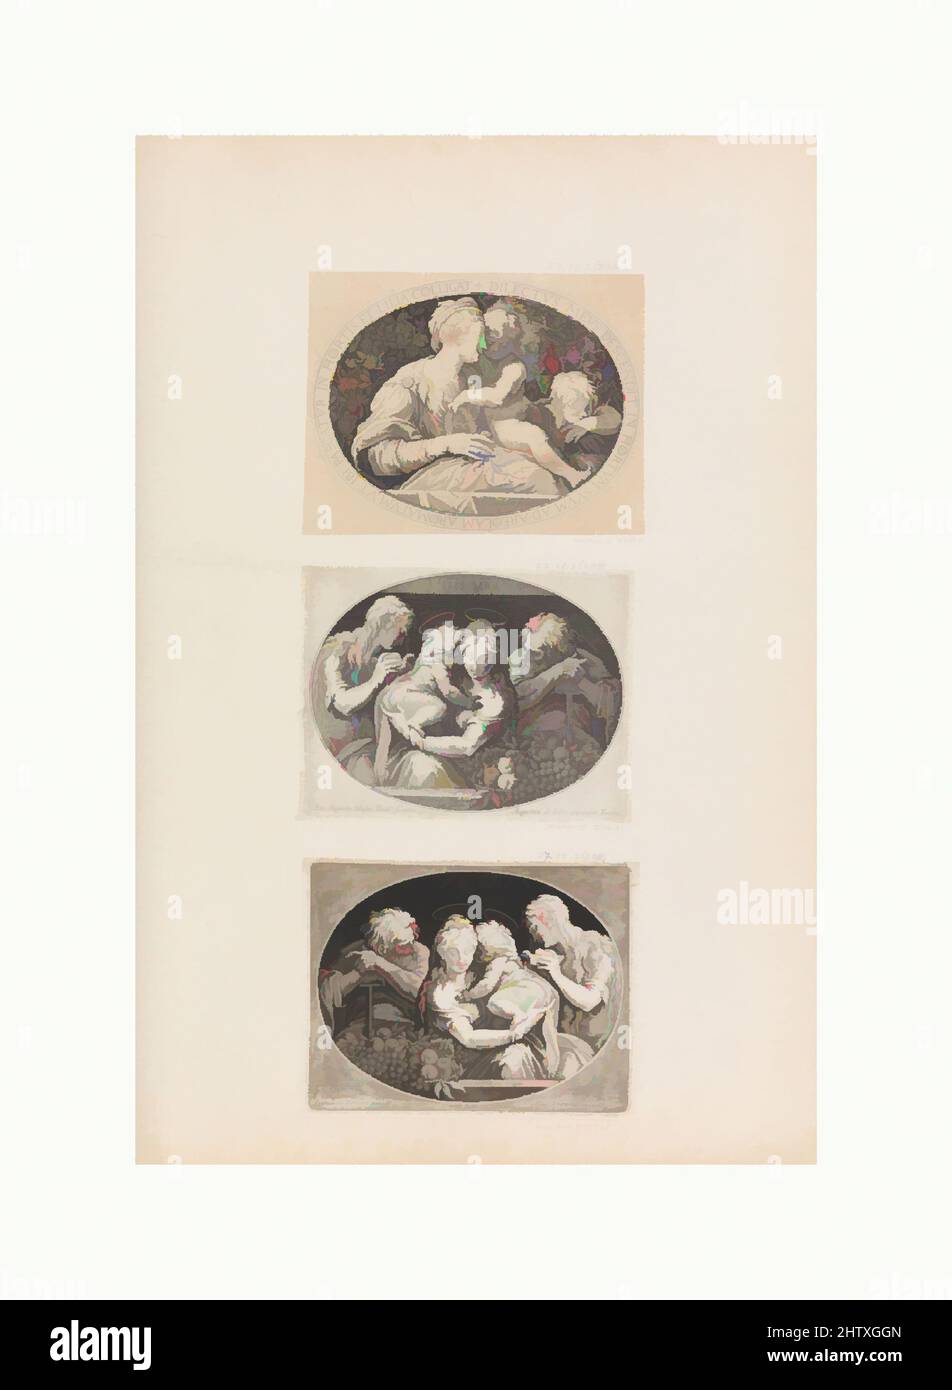 Art inspired by Holy Family, 1684, Prints, After Parmigianino (Girolamo Francesco Maria Mazzola) (Italian, Parma 1503–1540 Casalmaggiore), In Mariette Album, folio 81, bottom, Classic works modernized by Artotop with a splash of modernity. Shapes, color and value, eye-catching visual impact on art. Emotions through freedom of artworks in a contemporary way. A timeless message pursuing a wildly creative new direction. Artists turning to the digital medium and creating the Artotop NFT Stock Photo